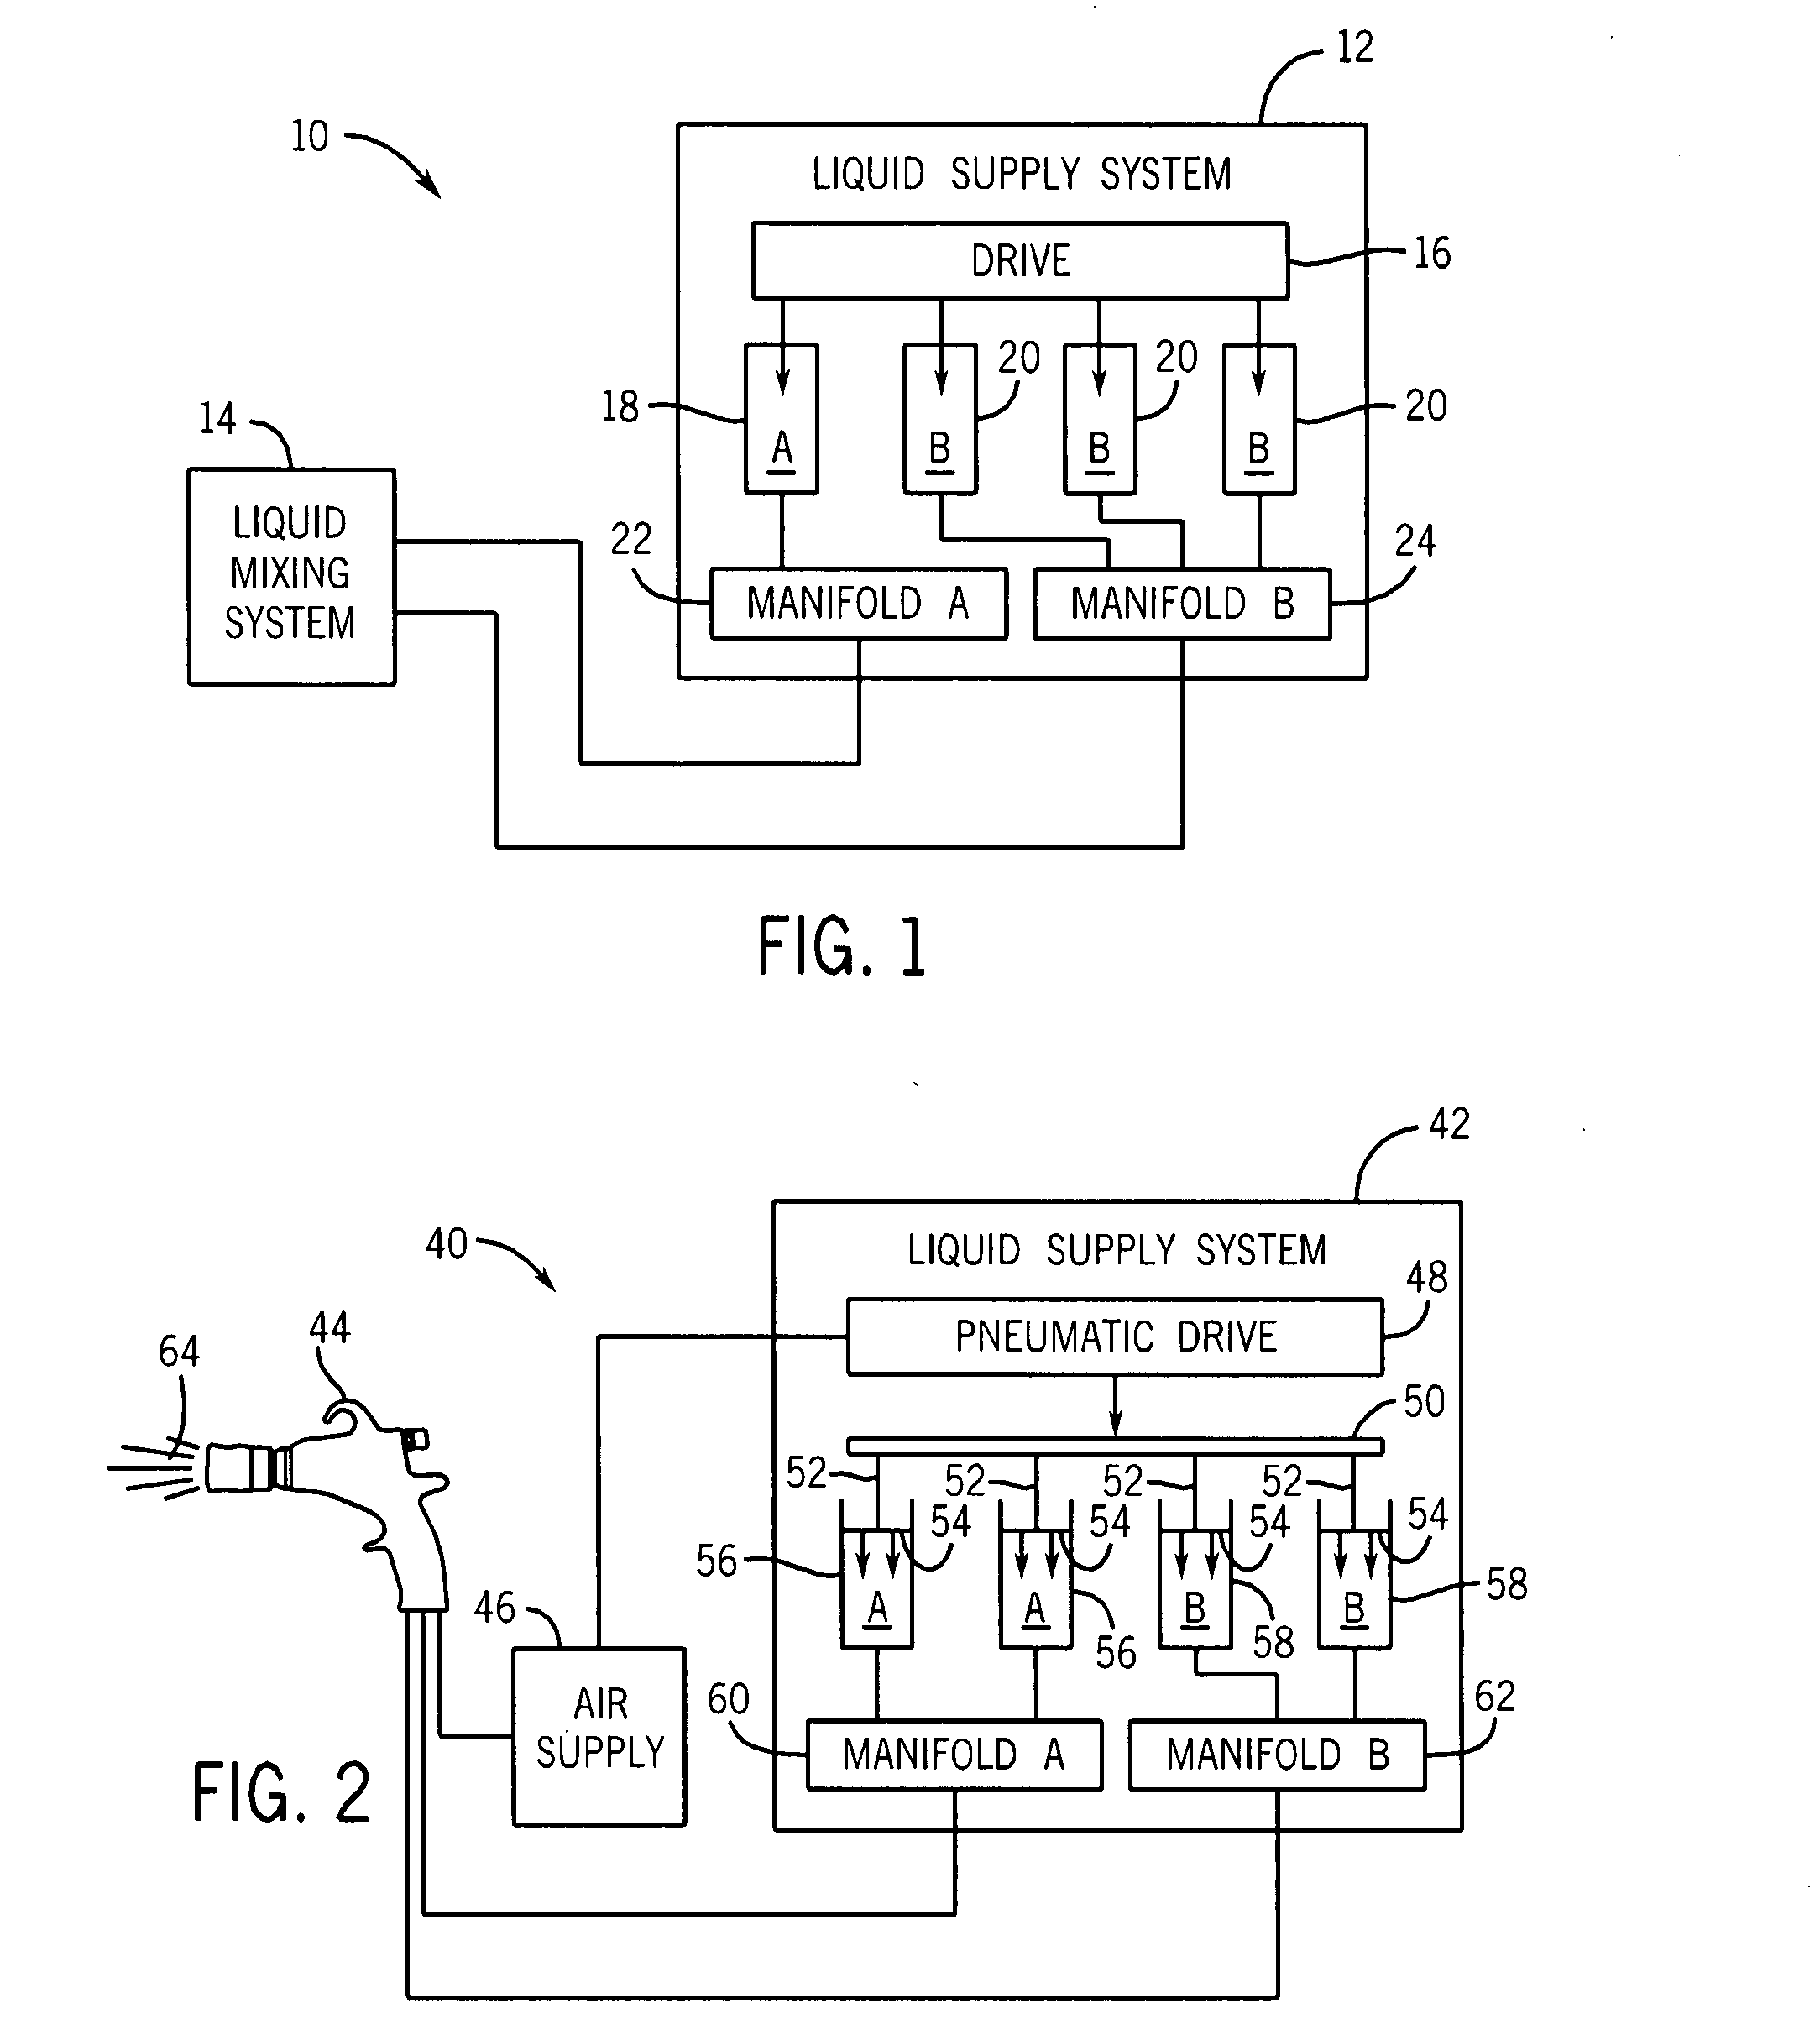 Positive displacement plural-component finishing dispenser system and method